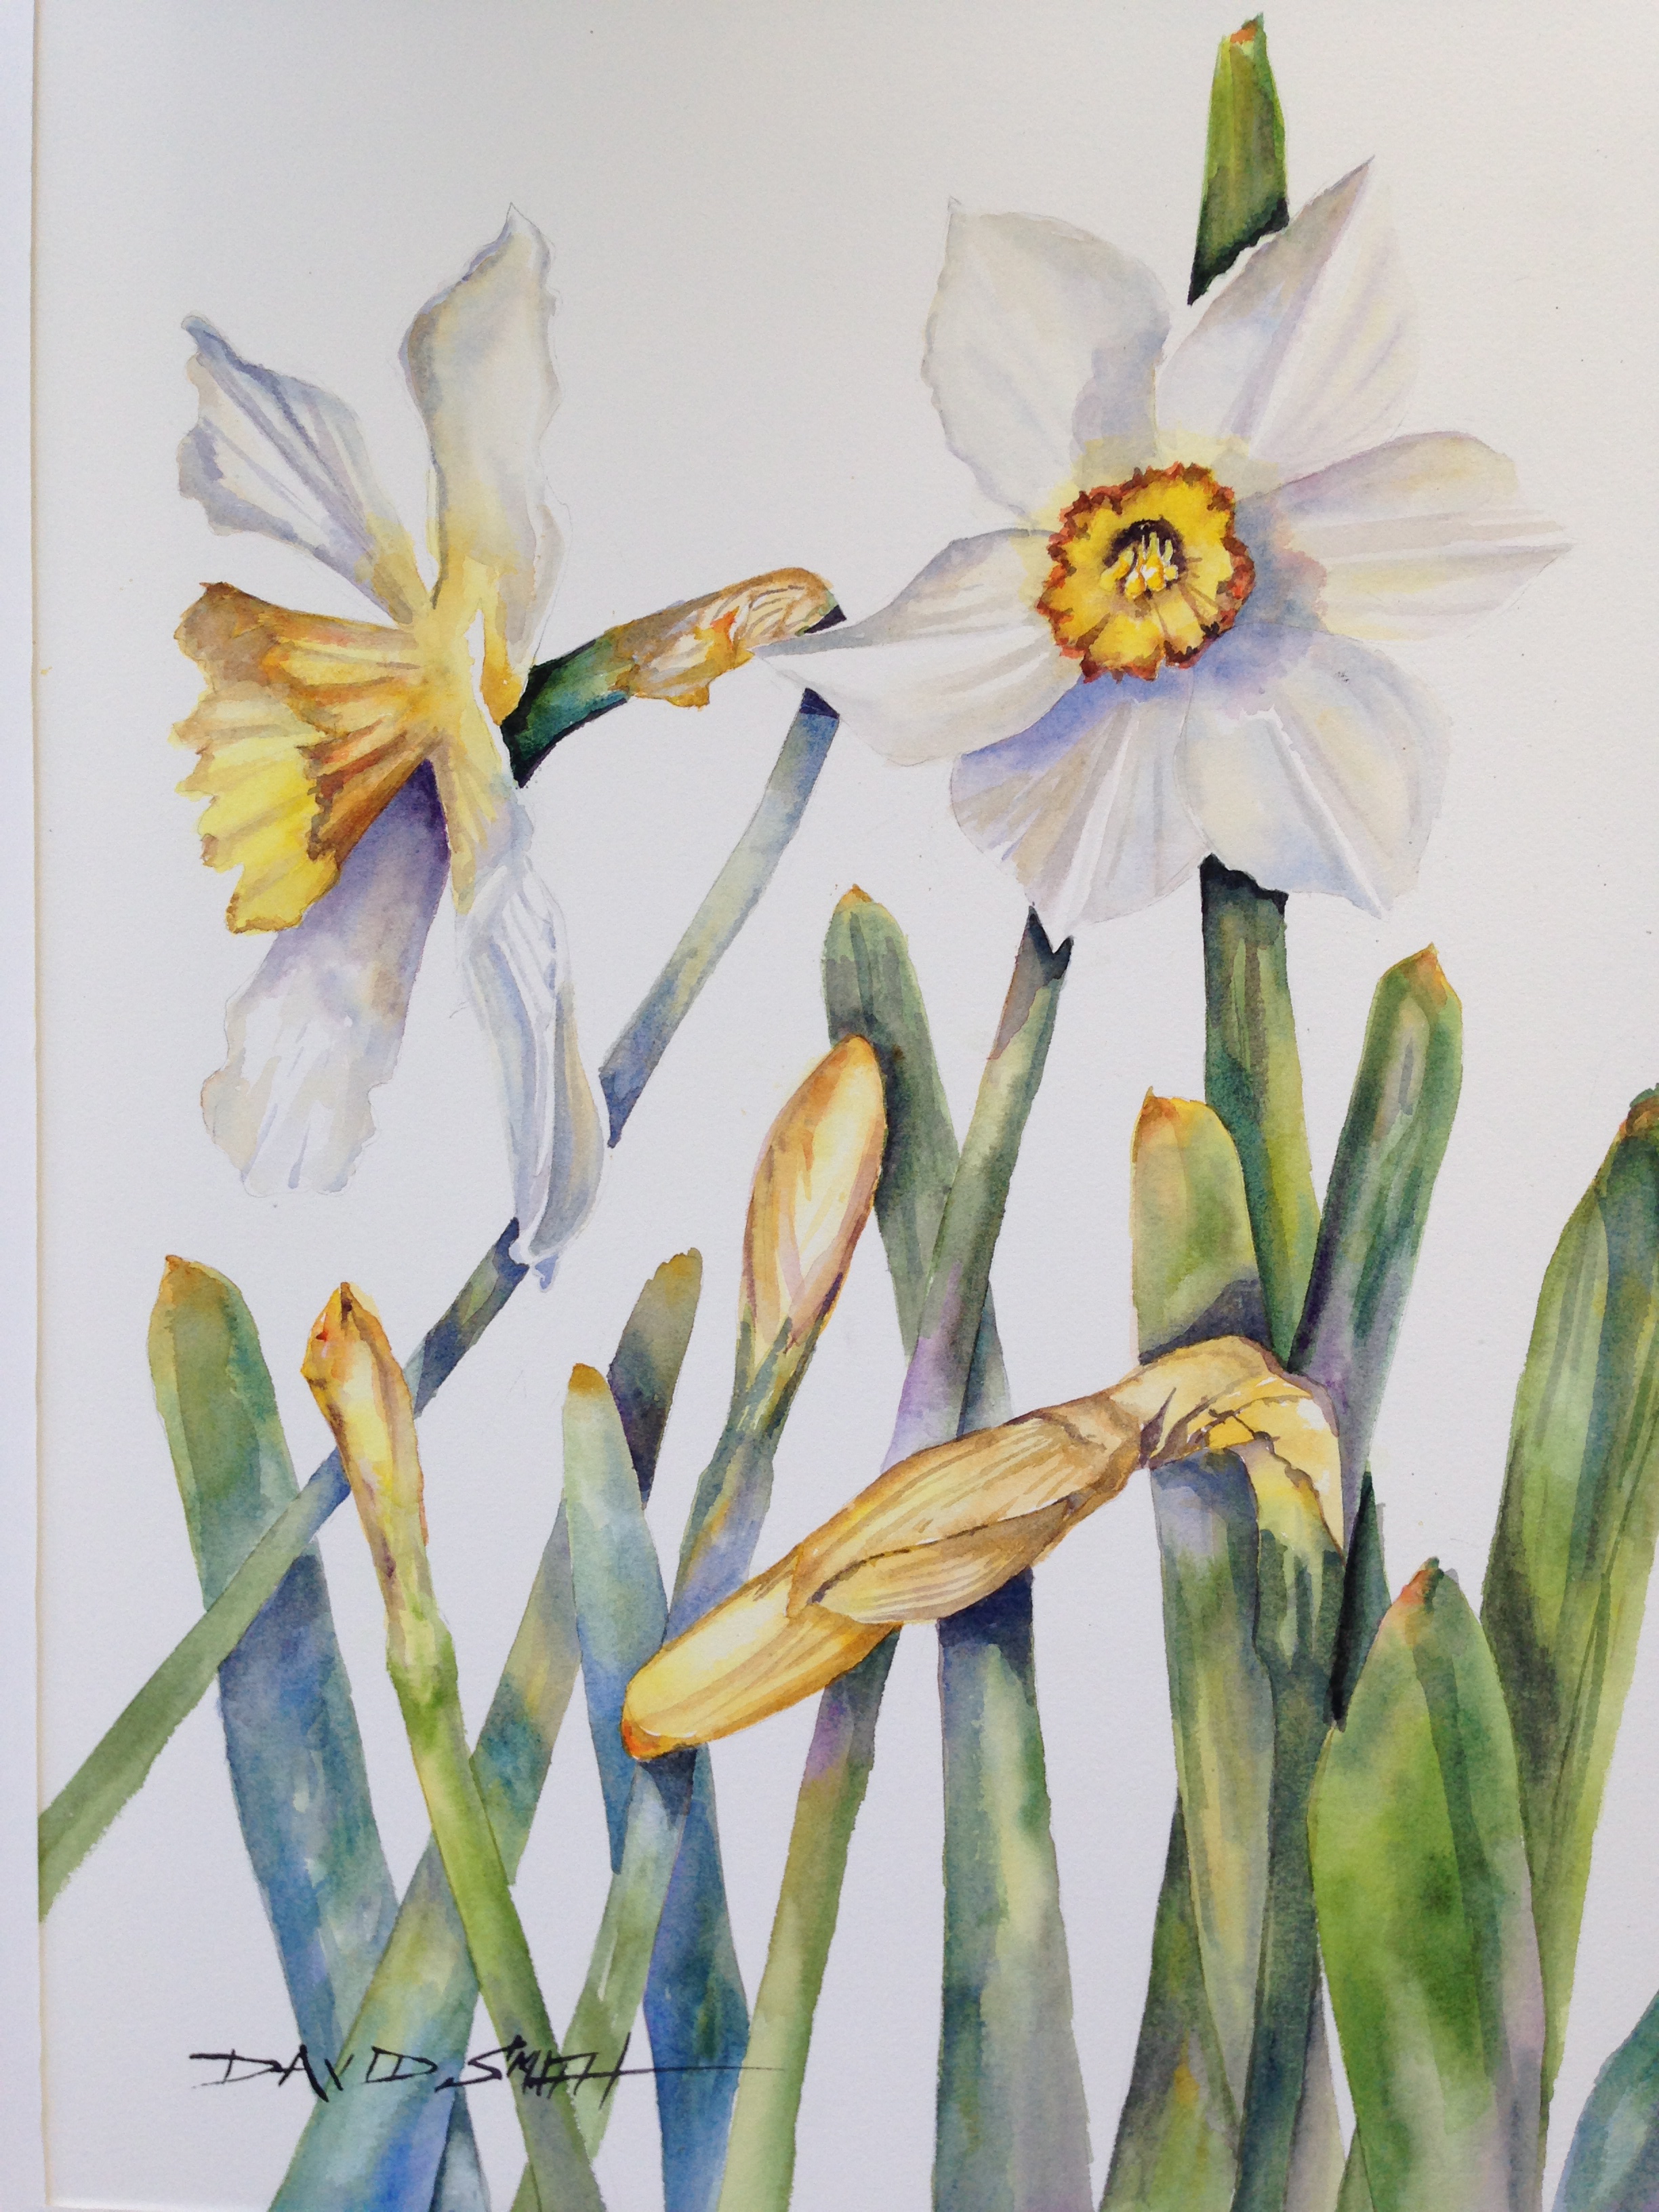 "Daffy" - Original and Prints Available